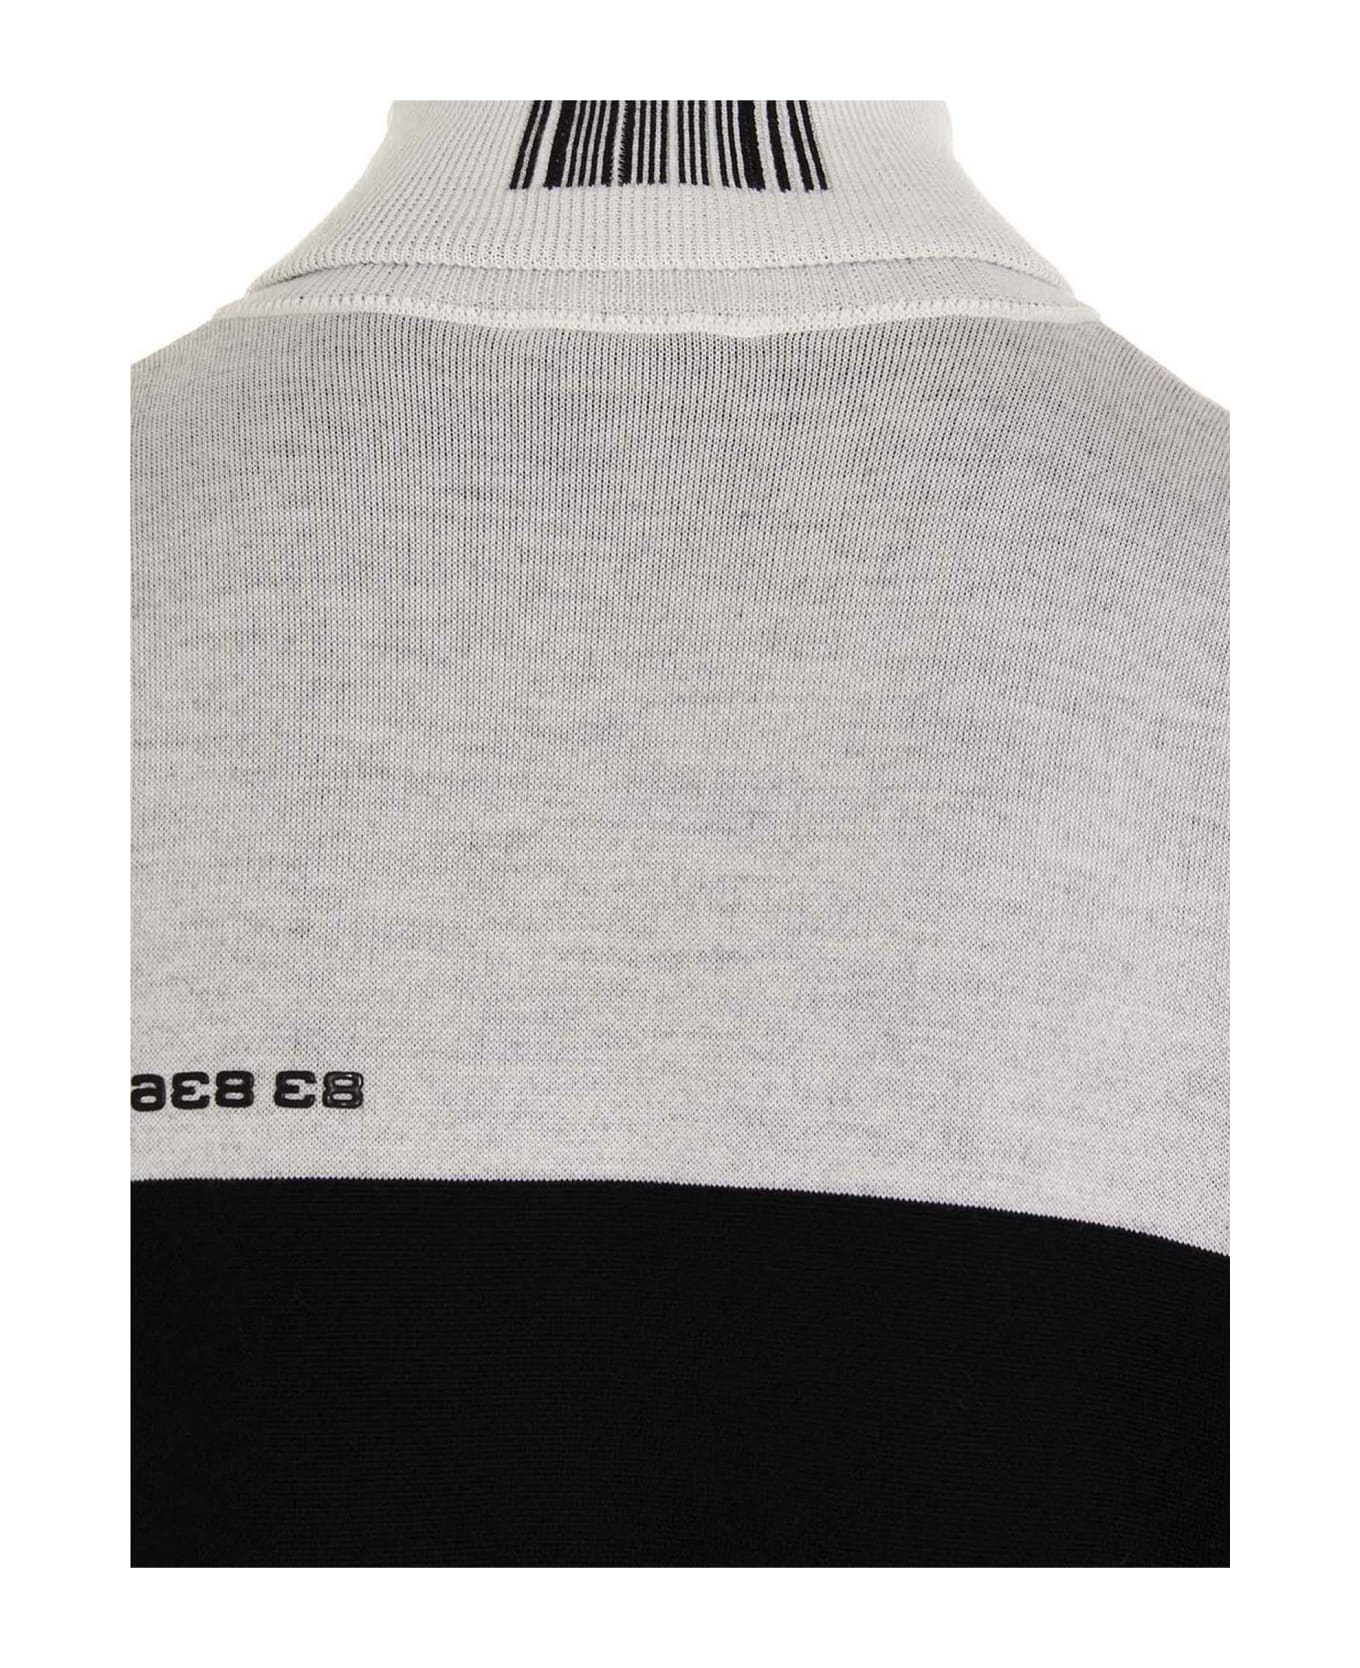 VTMNTS 'numbered Colorblock' Sweater - White Black